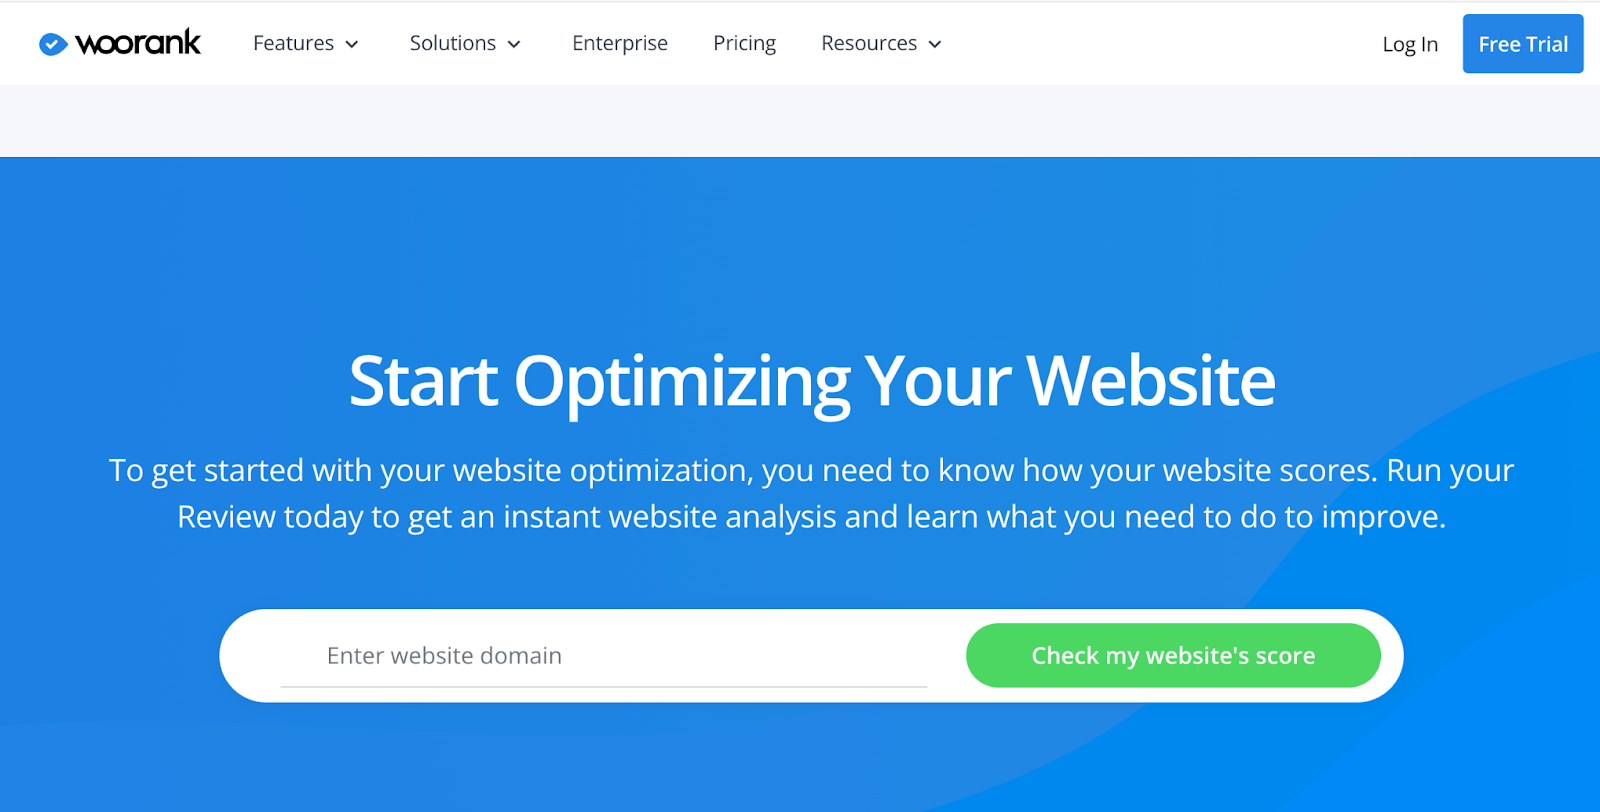 Woorank home page - Start optimizing your website